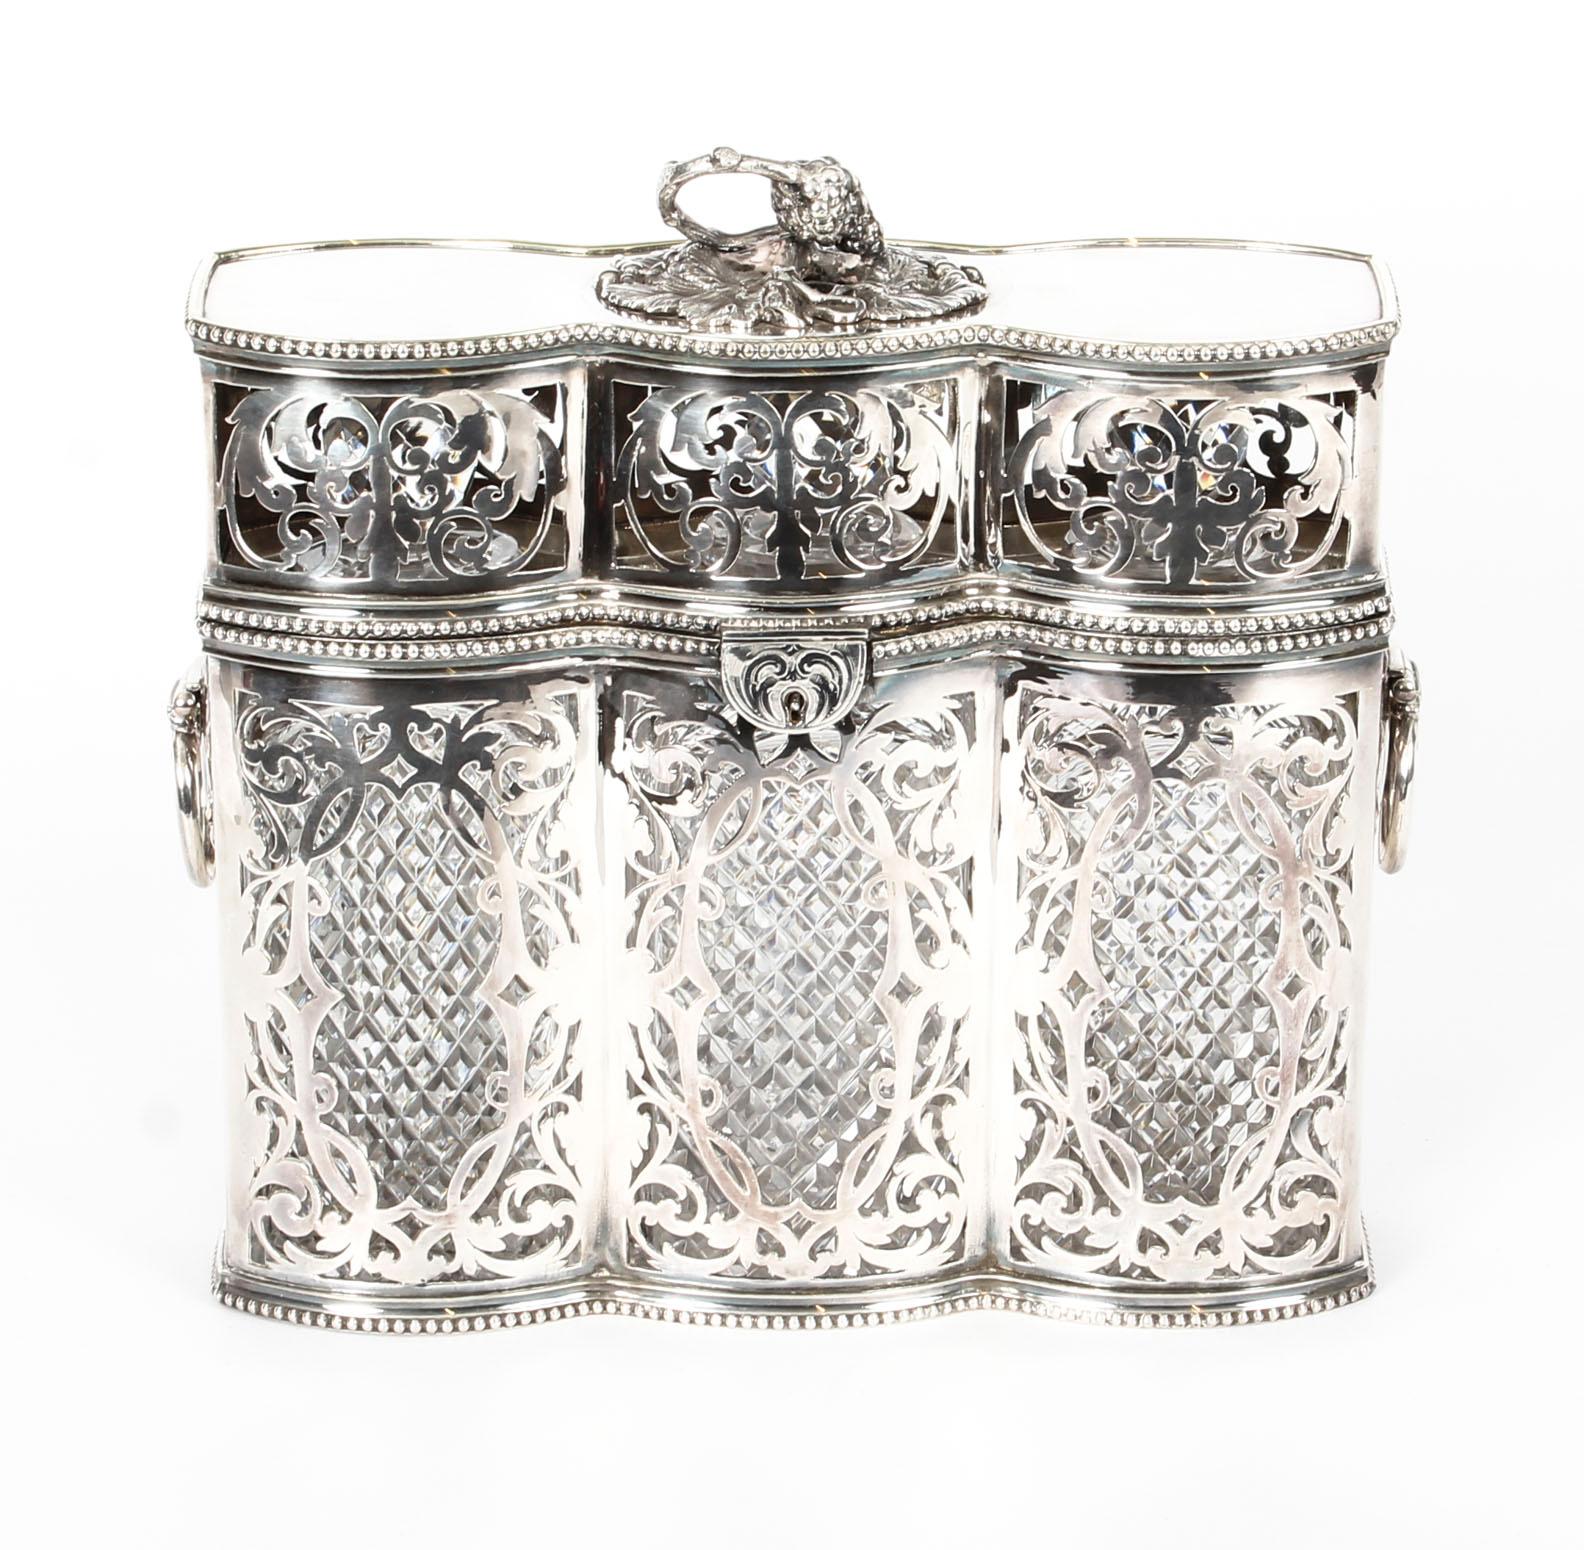 This is a highly decorative Victorian English silver plated three bottle tantalus, circa 1880 in date.

This wonderful tantalus has a stunning shaped openwork design featuring delightful scrolls and an elegant beaded border. It has two attractive